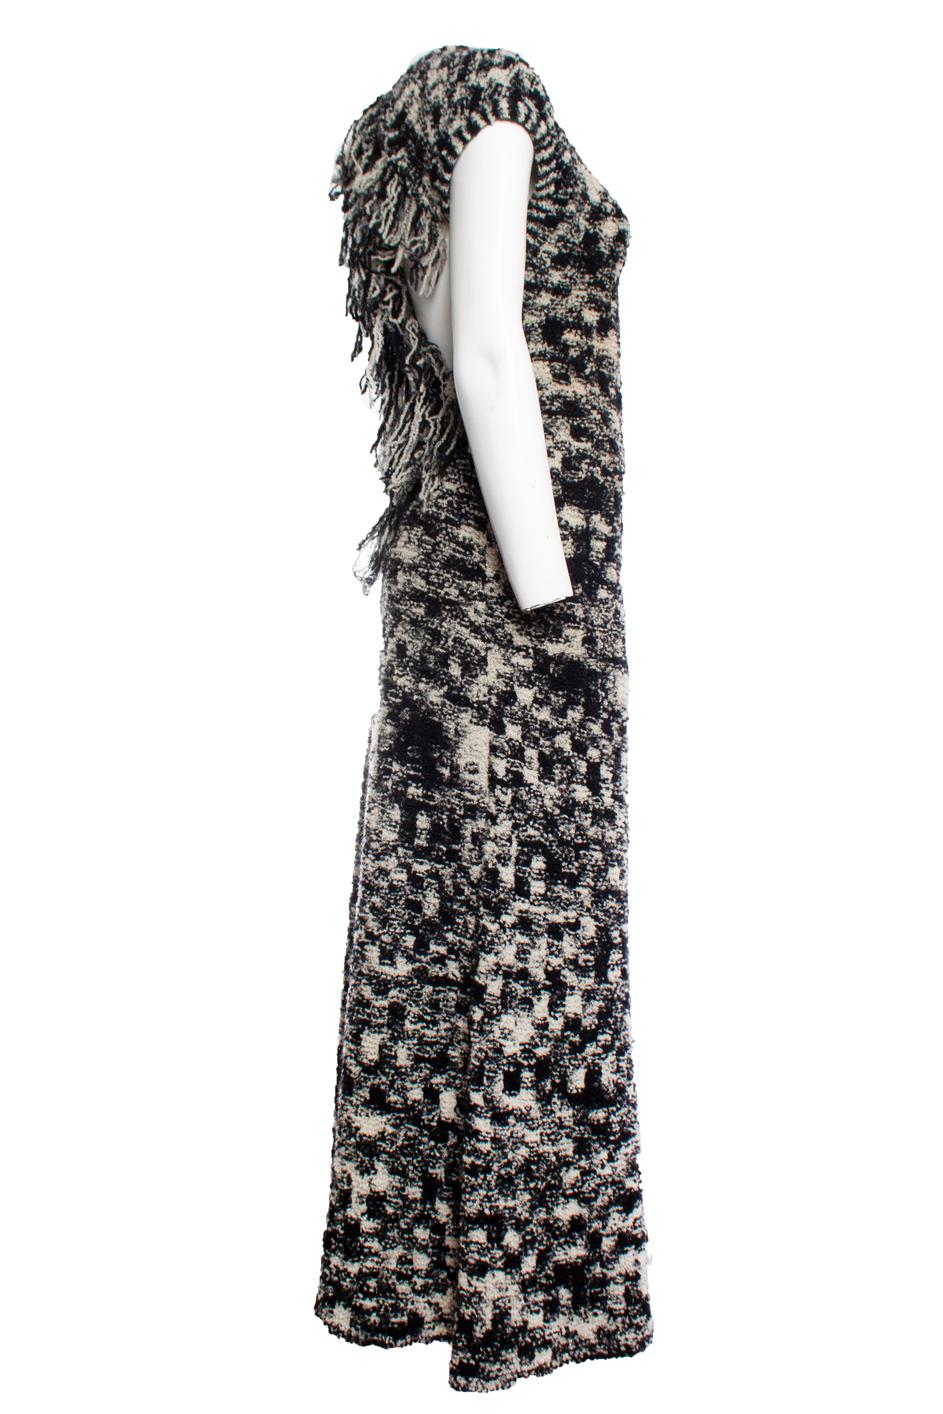 Chanel, Black and white boucle knit maxi gown For Sale 4